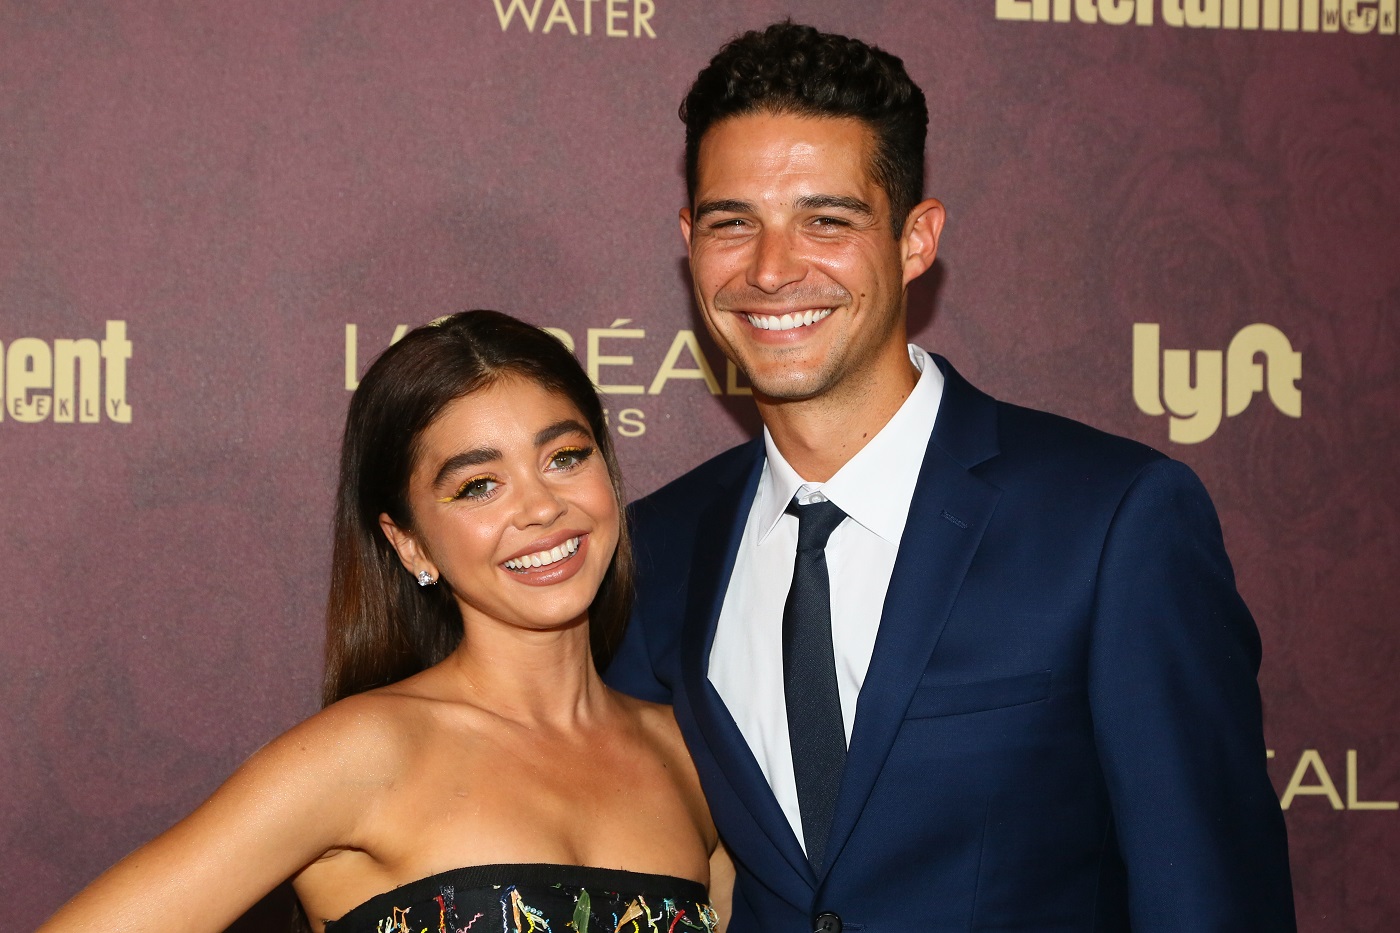 Sarah Hyland and Wells Adams arrive to the 2018 Entertainment Weekly Pre-Emmy Party at Sunset Tower Hotel